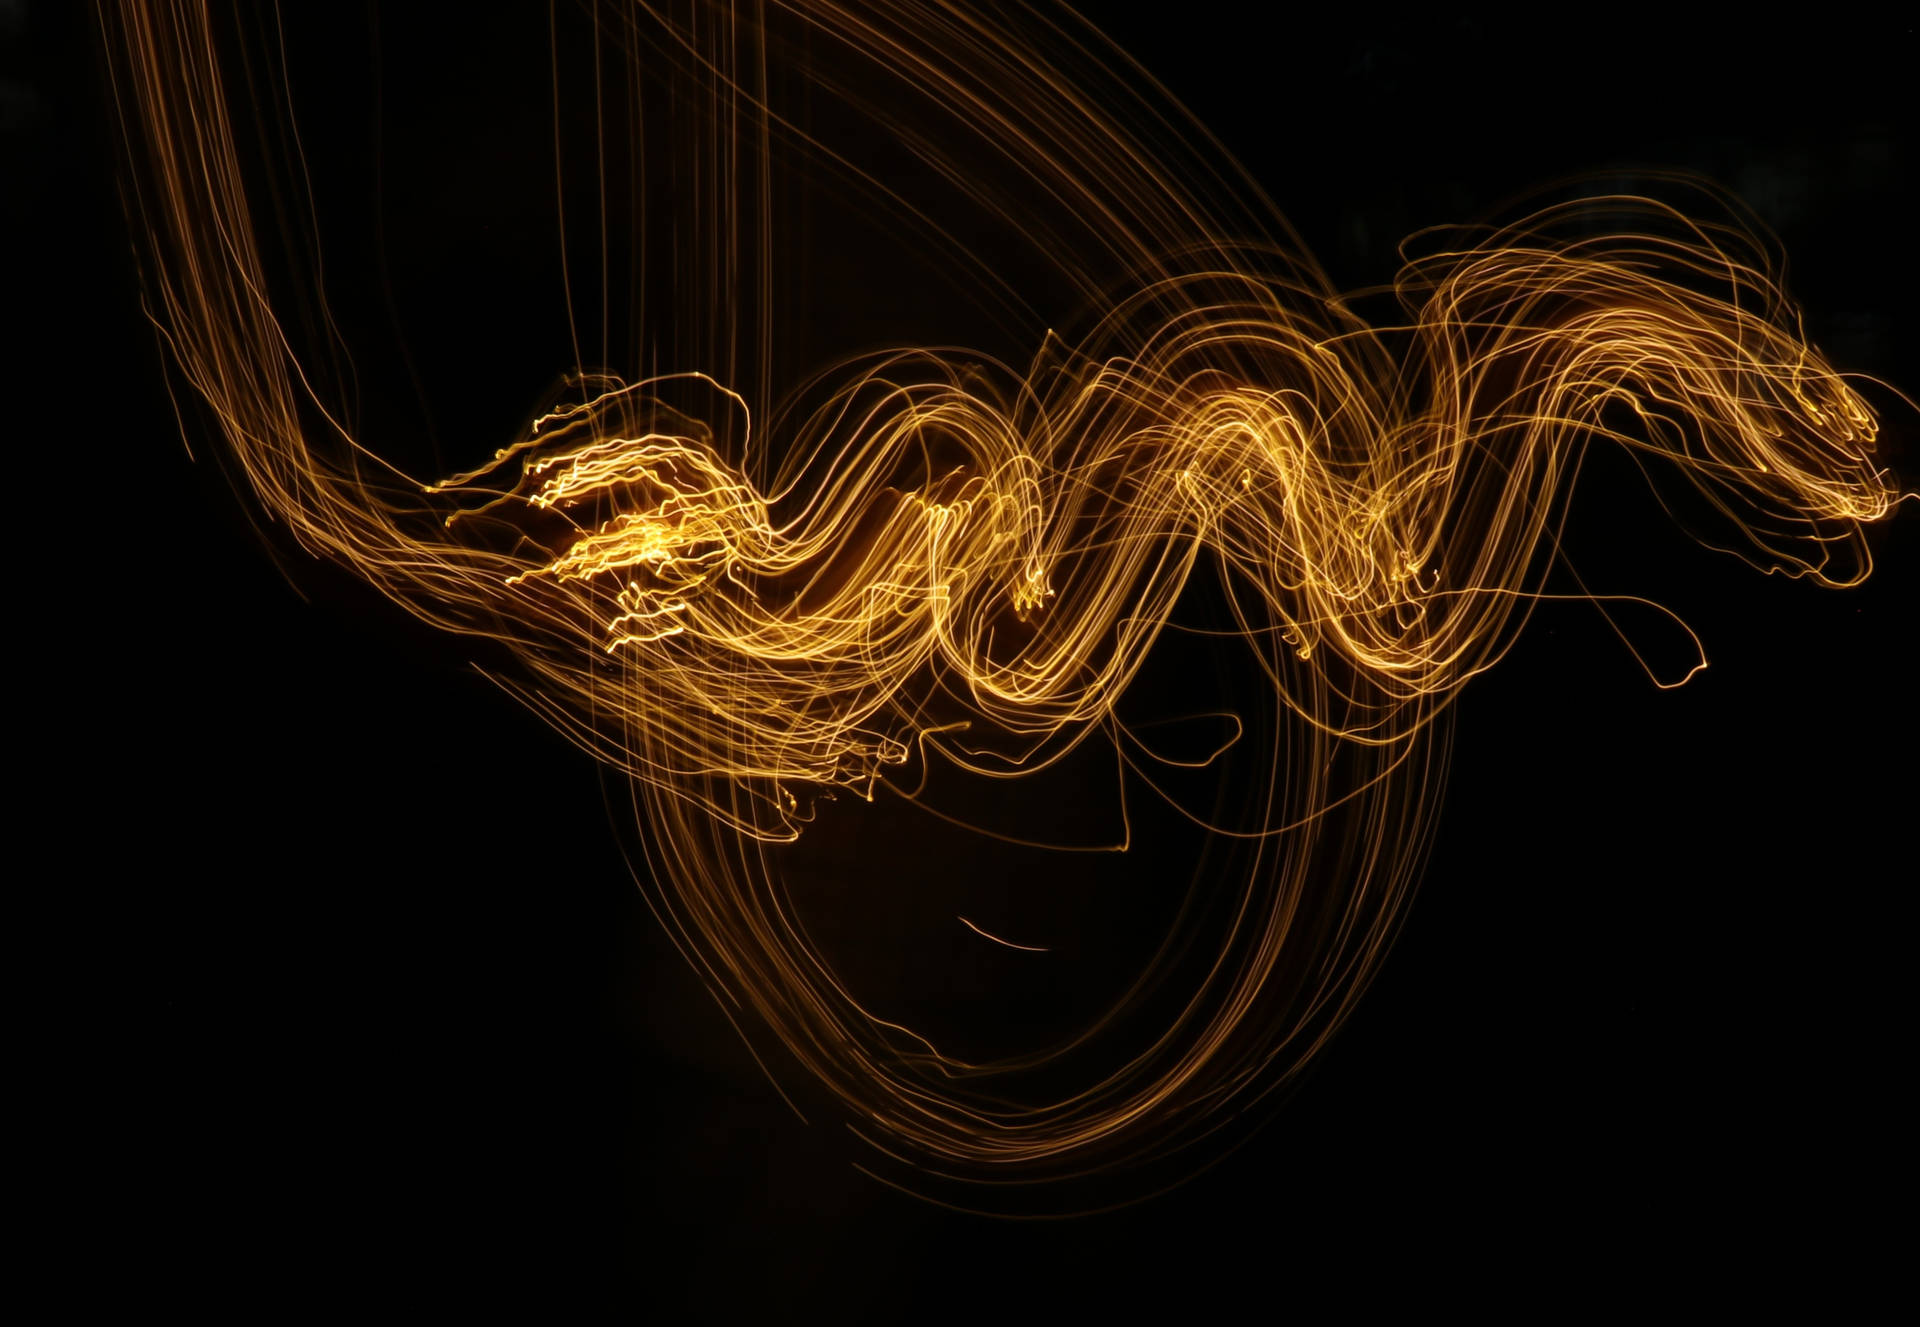 Black And Gold 4654X3217 Wallpaper and Background Image